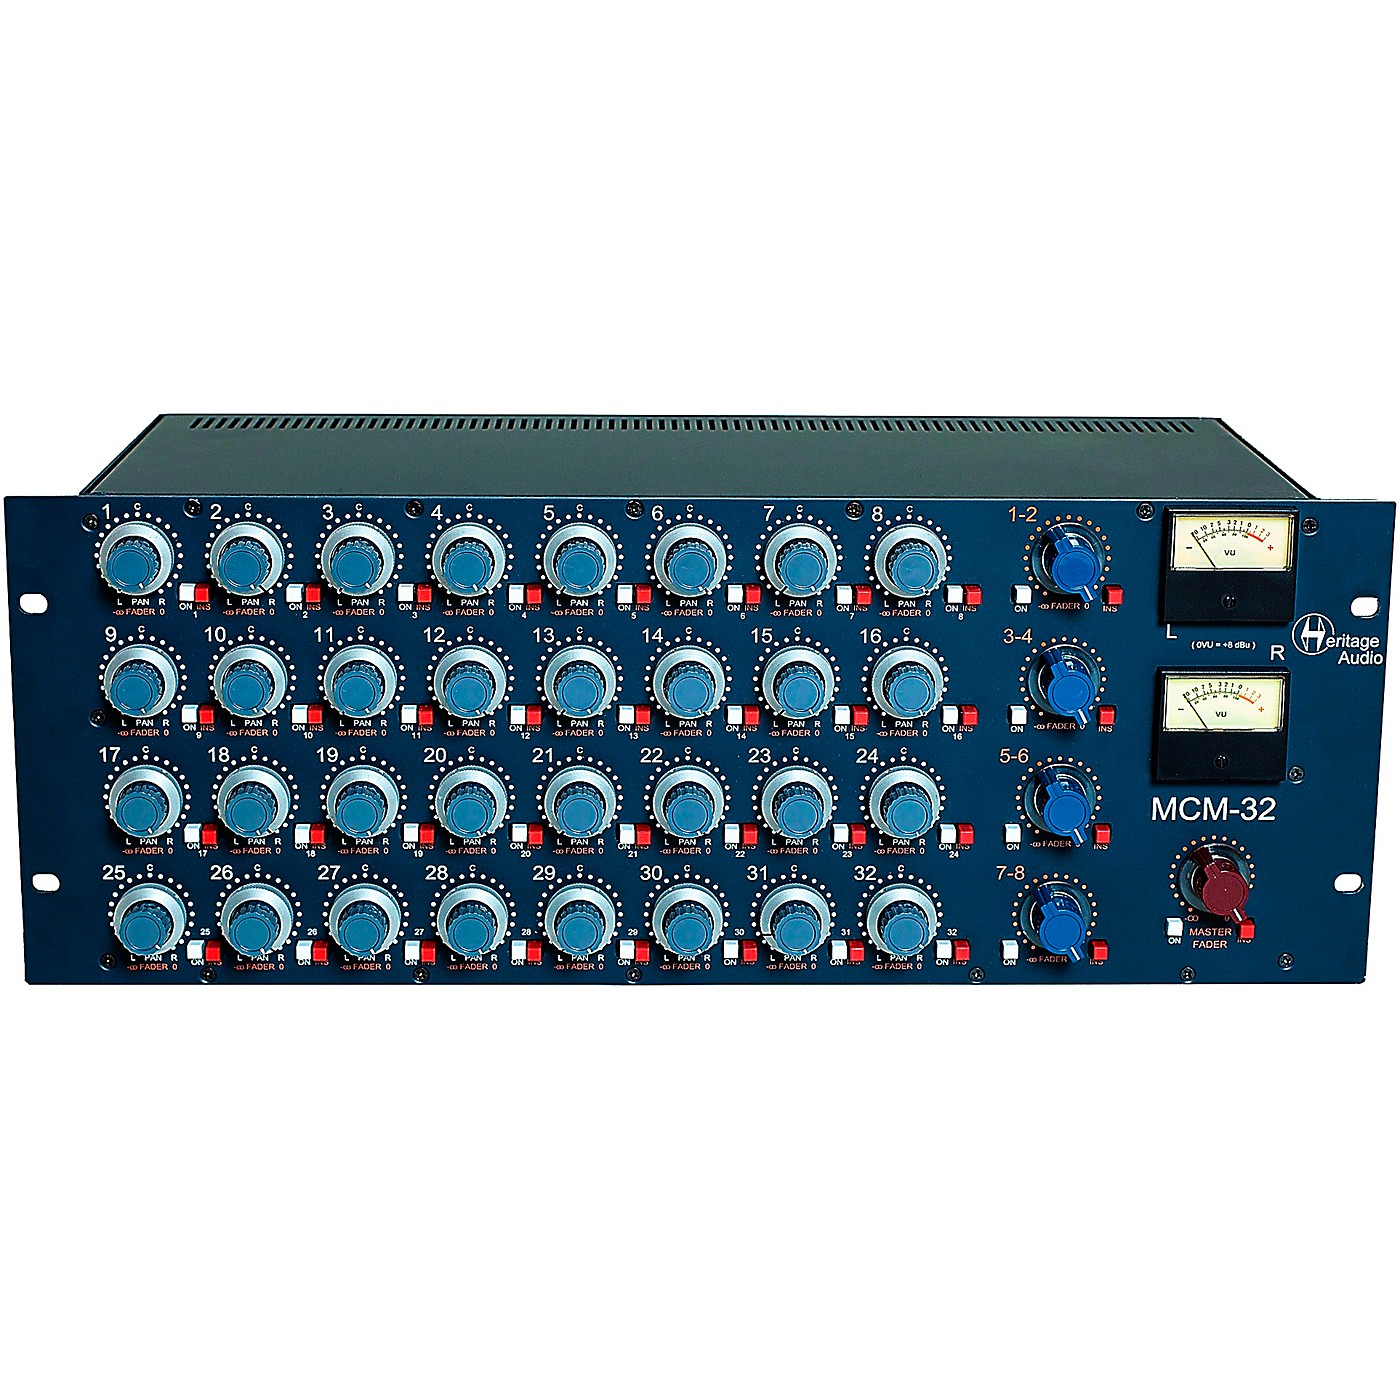 Heritage Audio MCM-32 32-channel Summing Mixer thumbnail